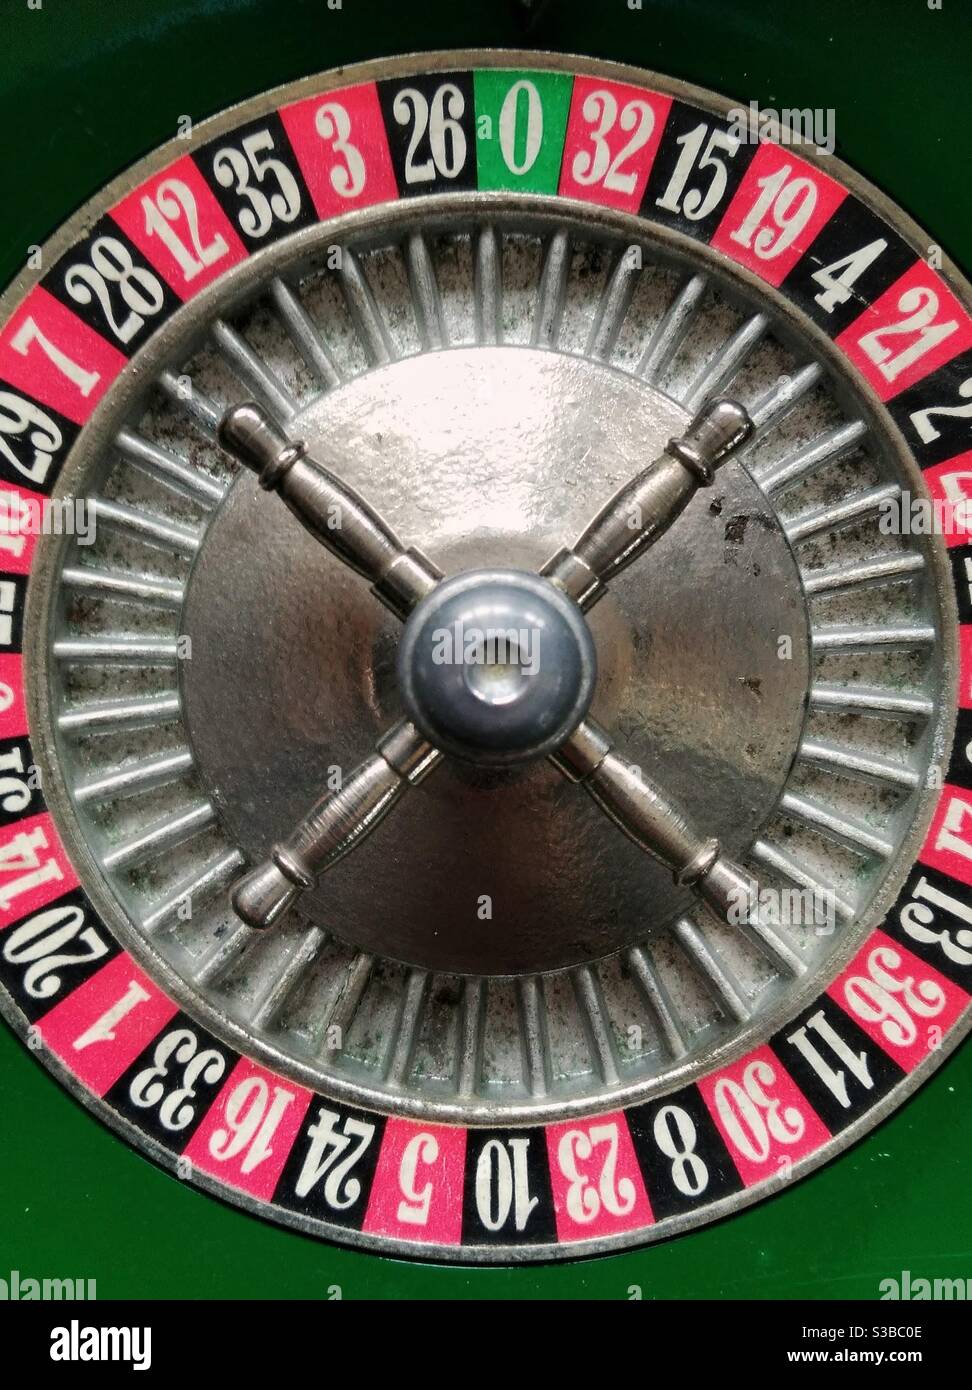 Roulette wheel close up Stock Photo